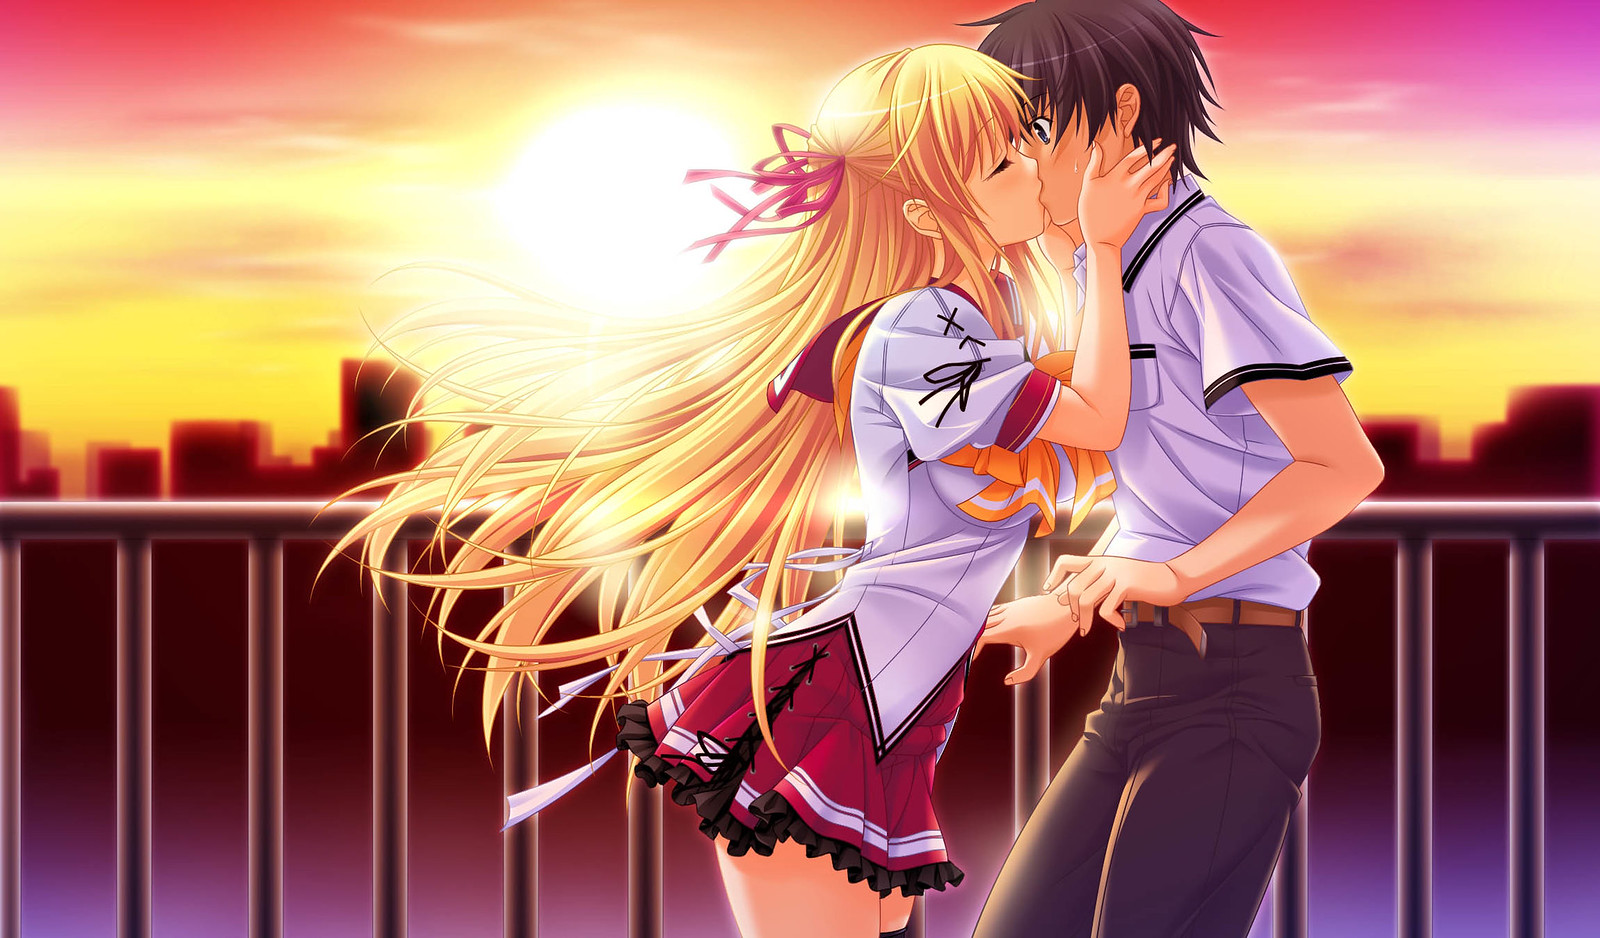 Best of Anime guy and girl kissing